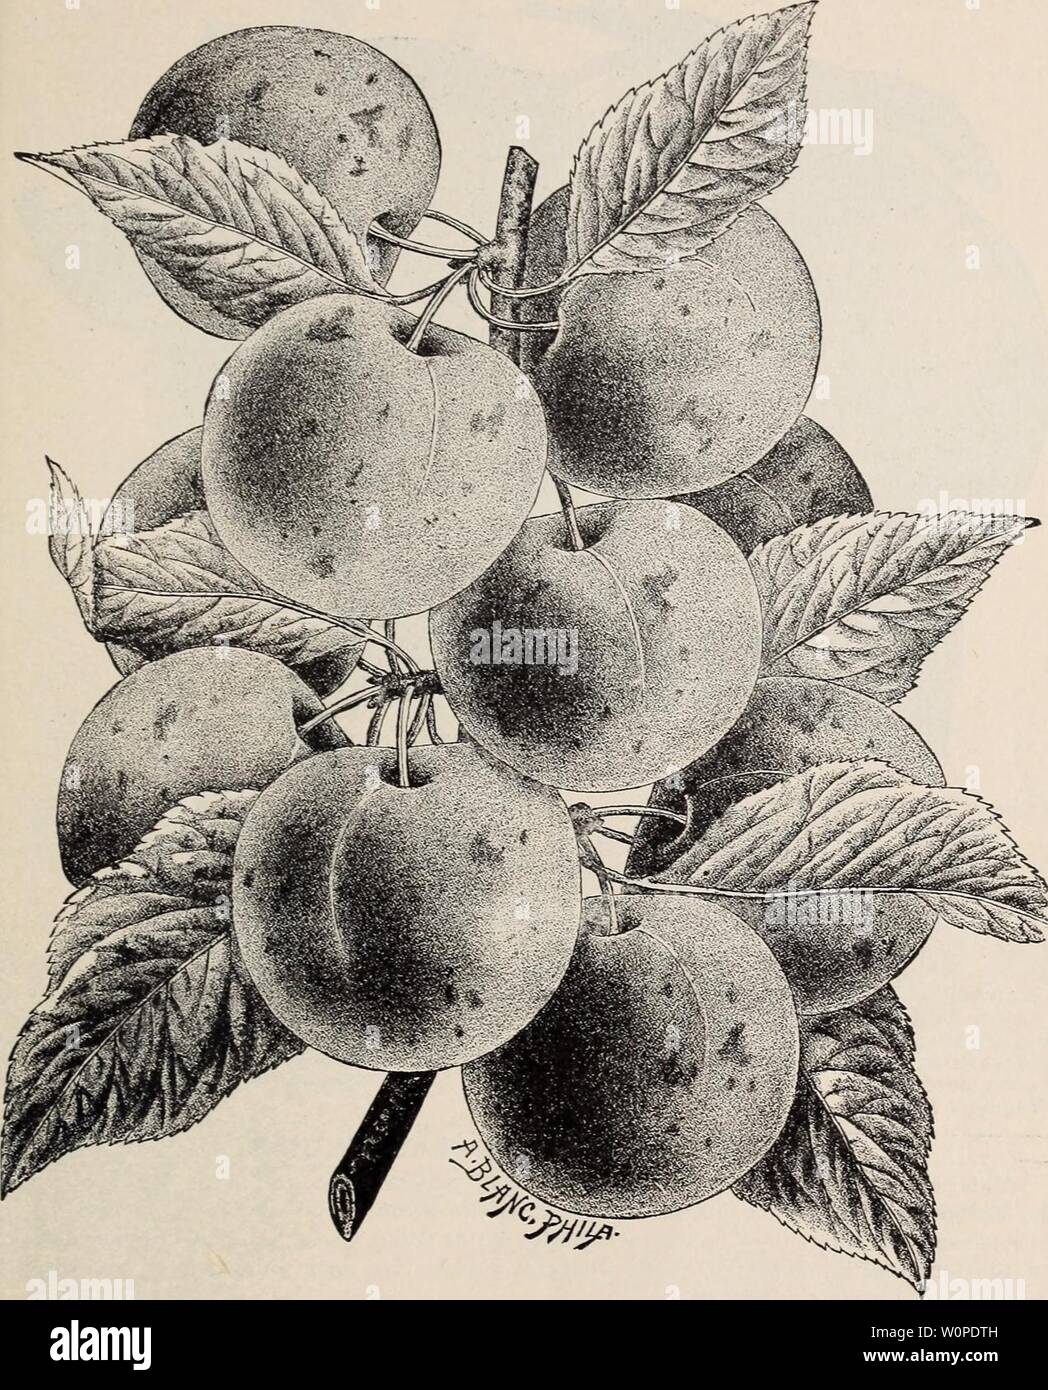 Archive image from page 48 of Descriptive catalogue of fruit and. Descriptive catalogue of fruit and ornamental trees, shrubs, vines and plants, cultivated and for sale descriptivecatal1893fran Year: 1893  Descriptive Catalogue. 45    Wild Goose Plum. ; Washington. {Bolmar's.) Very large ; skin j-ellowish green, often with a pale red blush ; flesh yellowish, firm, very sweet and luscious, separating freely from the stone. There is perhaps, not another plum that stands so high in general estimation in this country as V the Washington. Its great size, its beauty and the vigor and hardiness of t Stock Photo